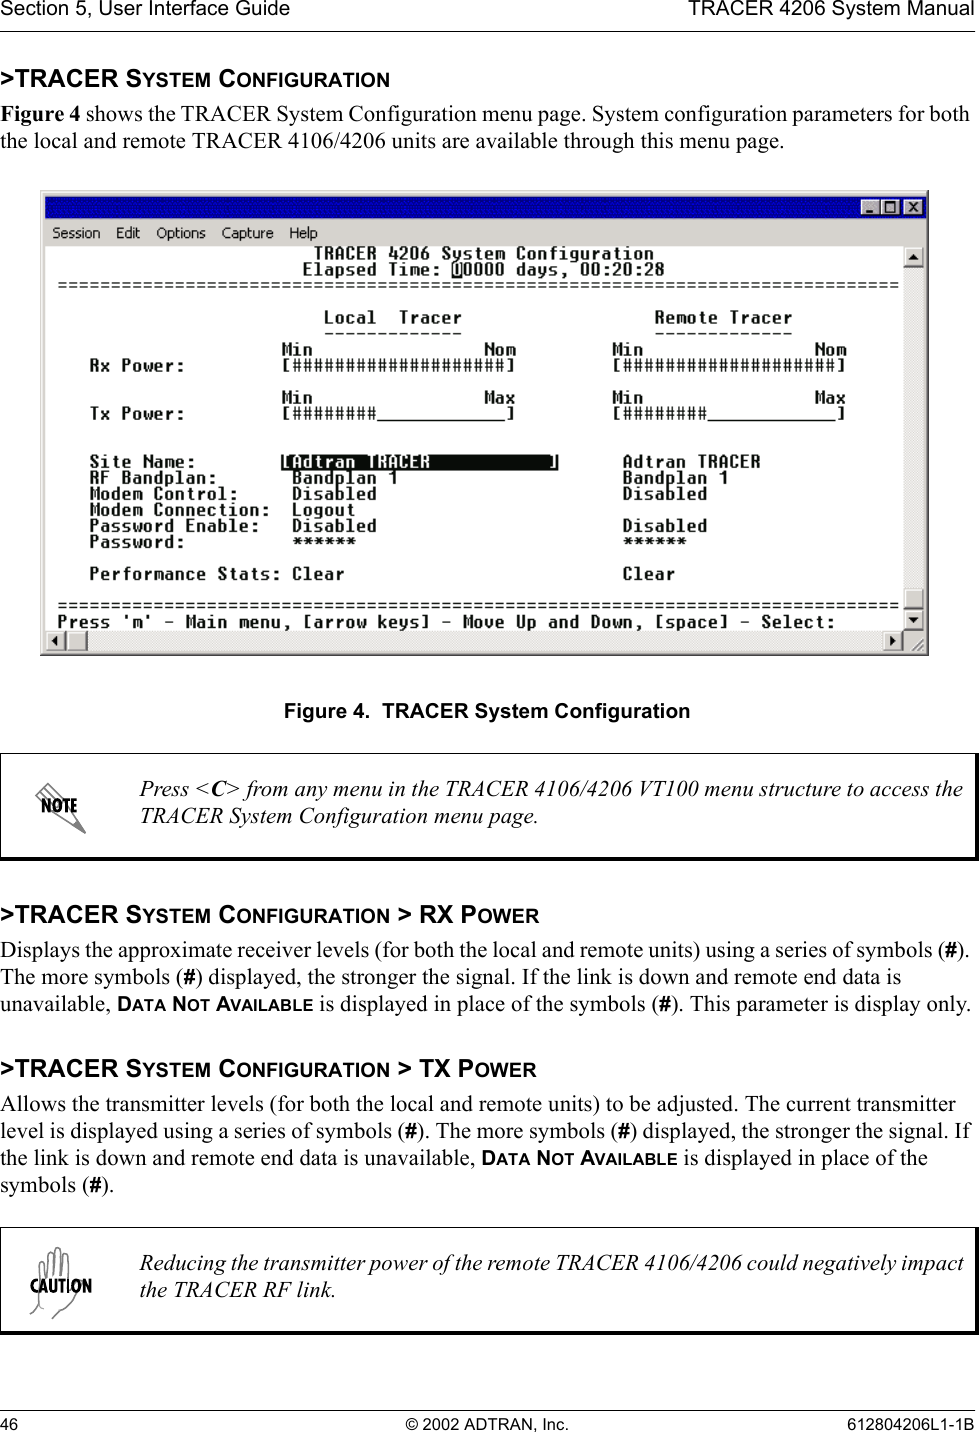 Section 5, User Interface Guide TRACER 4206 System Manual46 © 2002 ADTRAN, Inc. 612804206L1-1B&gt;TRACER SYSTEM CONFIGURATIONFigure 4 shows the TRACER System Configuration menu page. System configuration parameters for both the local and remote TRACER 4106/4206 units are available through this menu page.Figure 4.  TRACER System Configuration&gt;TRACER SYSTEM CONFIGURATION &gt; RX POWERDisplays the approximate receiver levels (for both the local and remote units) using a series of symbols (#). The more symbols (#) displayed, the stronger the signal. If the link is down and remote end data is unavailable, DATA NOT AVAILABLE is displayed in place of the symbols (#). This parameter is display only.&gt;TRACER SYSTEM CONFIGURATION &gt; TX POWERAllows the transmitter levels (for both the local and remote units) to be adjusted. The current transmitter level is displayed using a series of symbols (#). The more symbols (#) displayed, the stronger the signal. If the link is down and remote end data is unavailable, DATA NOT AVAILABLE is displayed in place of the symbols (#).Press &lt;C&gt; from any menu in the TRACER 4106/4206 VT100 menu structure to access the TRACER System Configuration menu page.Reducing the transmitter power of the remote TRACER 4106/4206 could negatively impact the TRACER RF link.